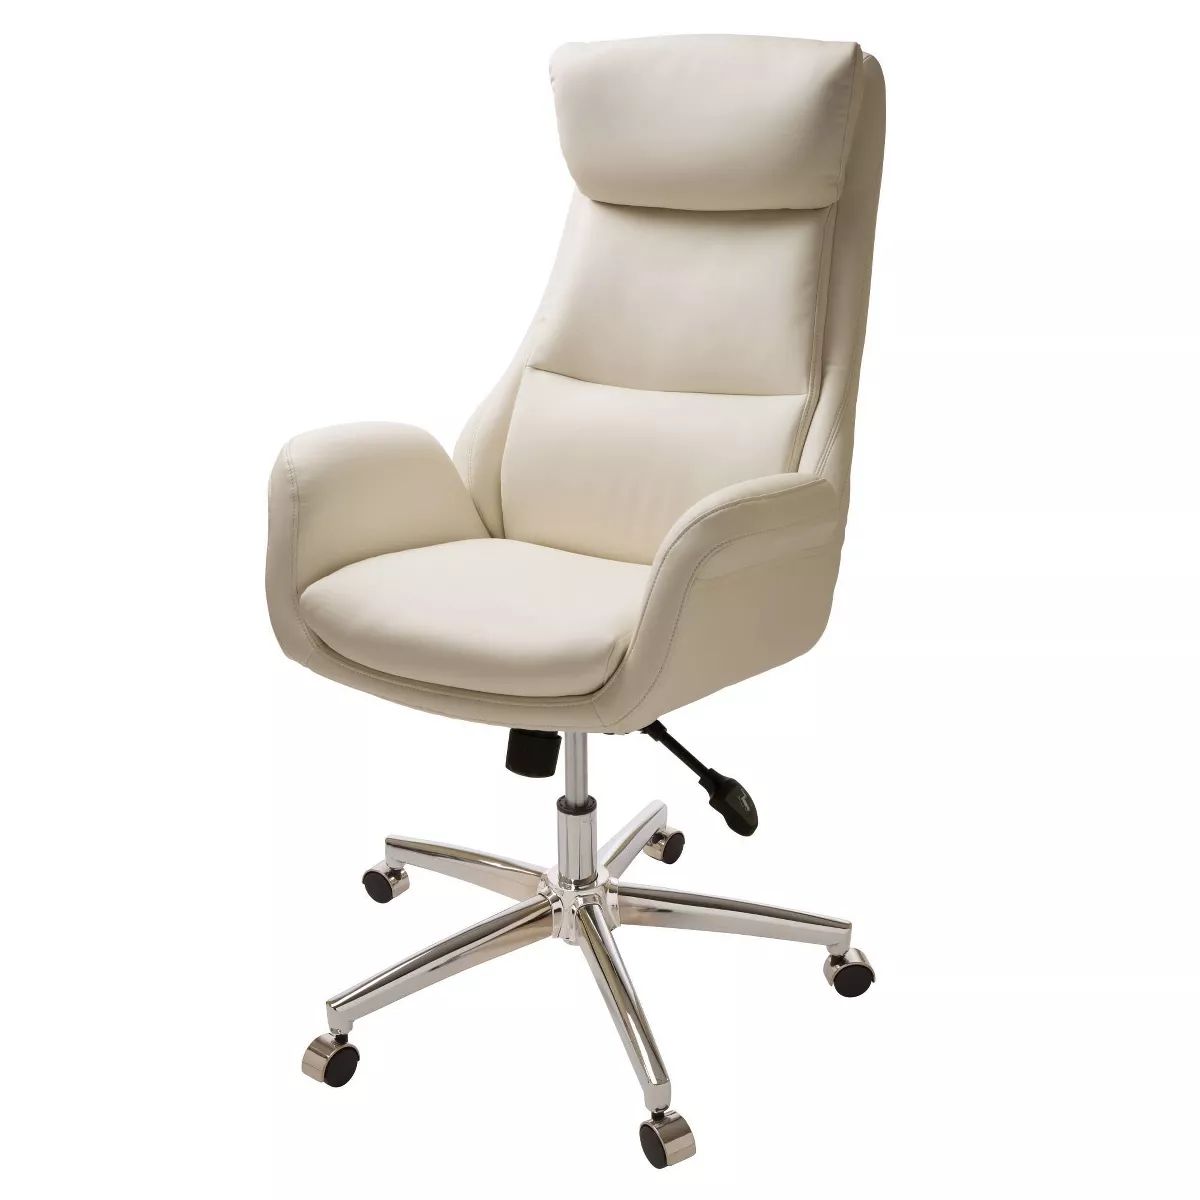 Mid Century Modern Bonded Leather Gaslift Adjustable Swivel Office Chair Cream - Glitzhome | Target